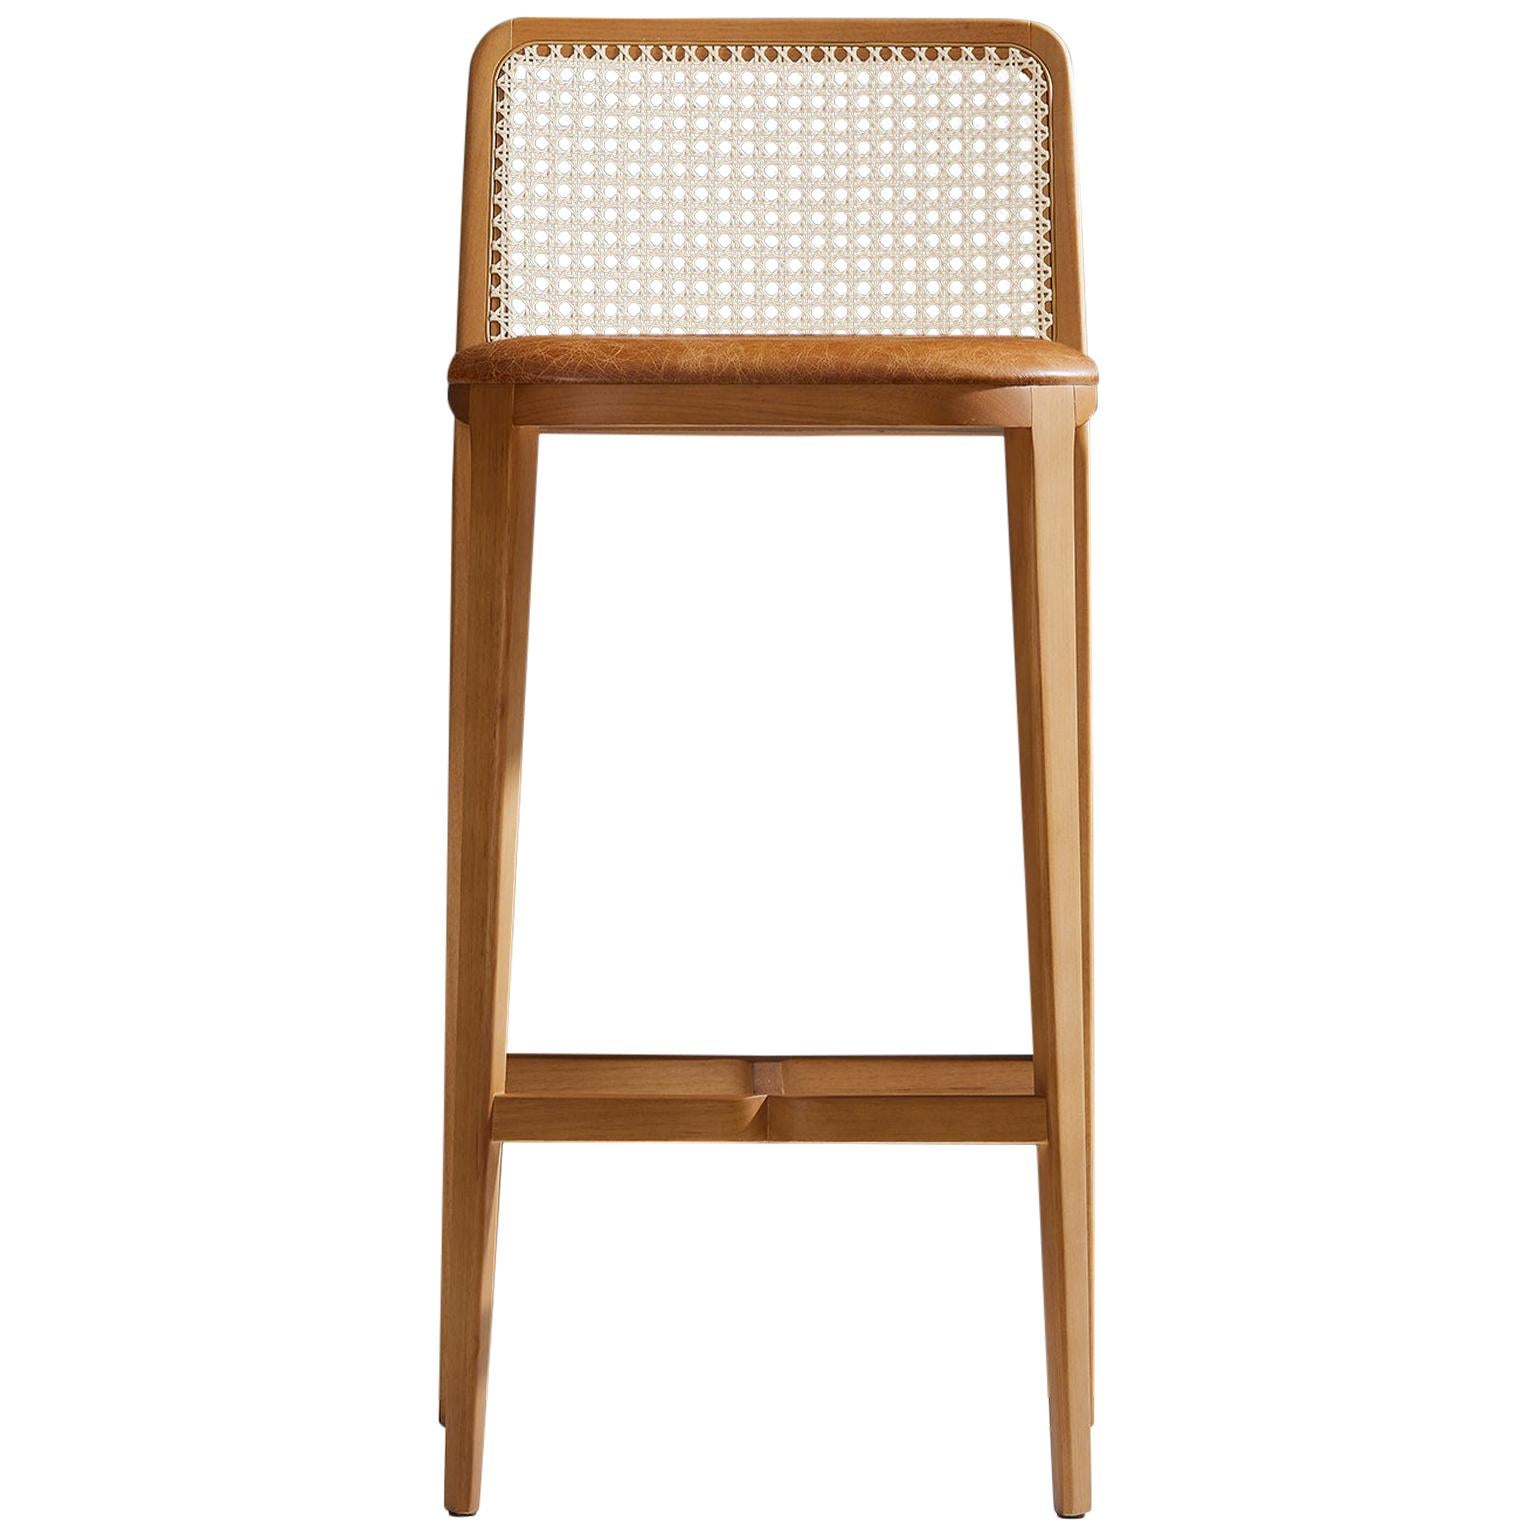 Minimal Style, Solid Wood Stool, Bar or Counter Hight, Caning and Leather For Sale